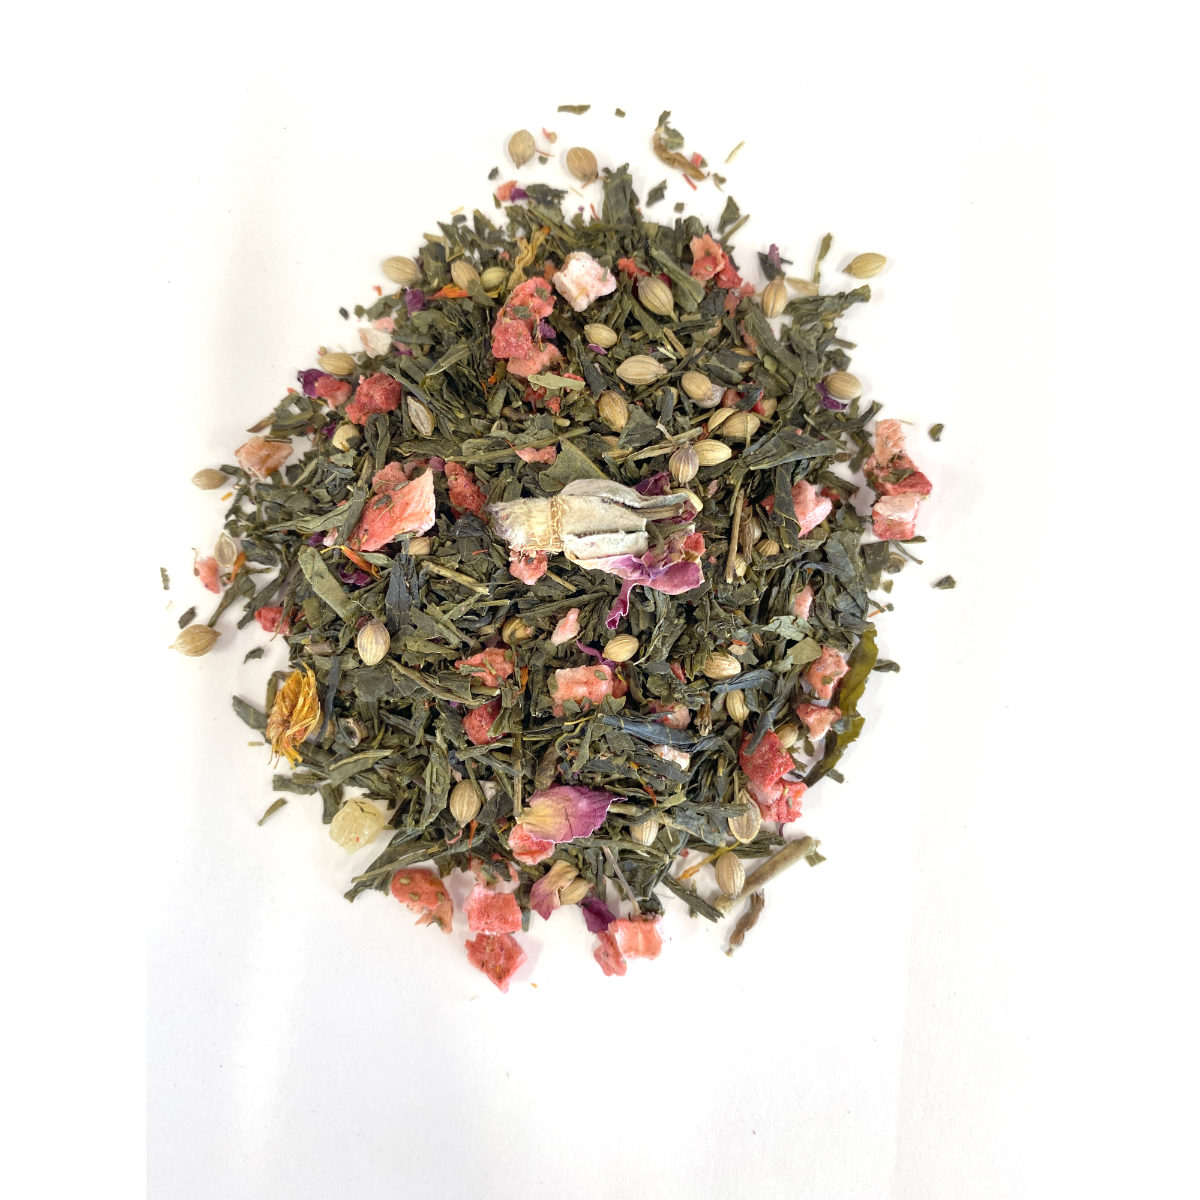 olstice Green Tea Chinese Sencha Green Tea with a structured leaf and mild taste paired with Pineapple, Papaya, Strawberry and Coriander.